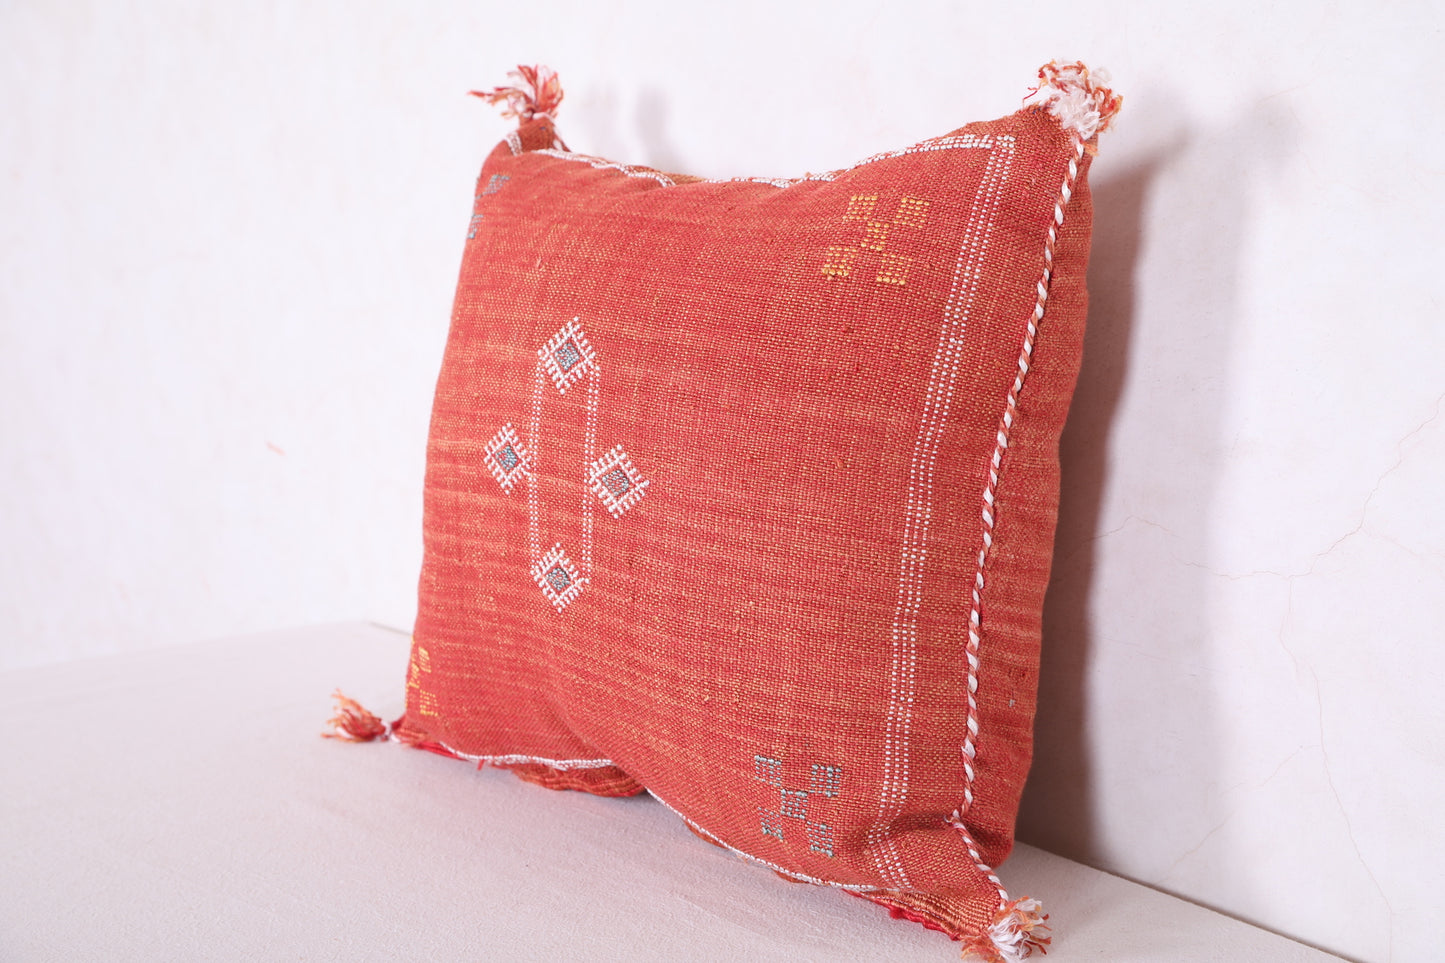 Handmade pillow 16.5 INCHES X 18.5 INCHES